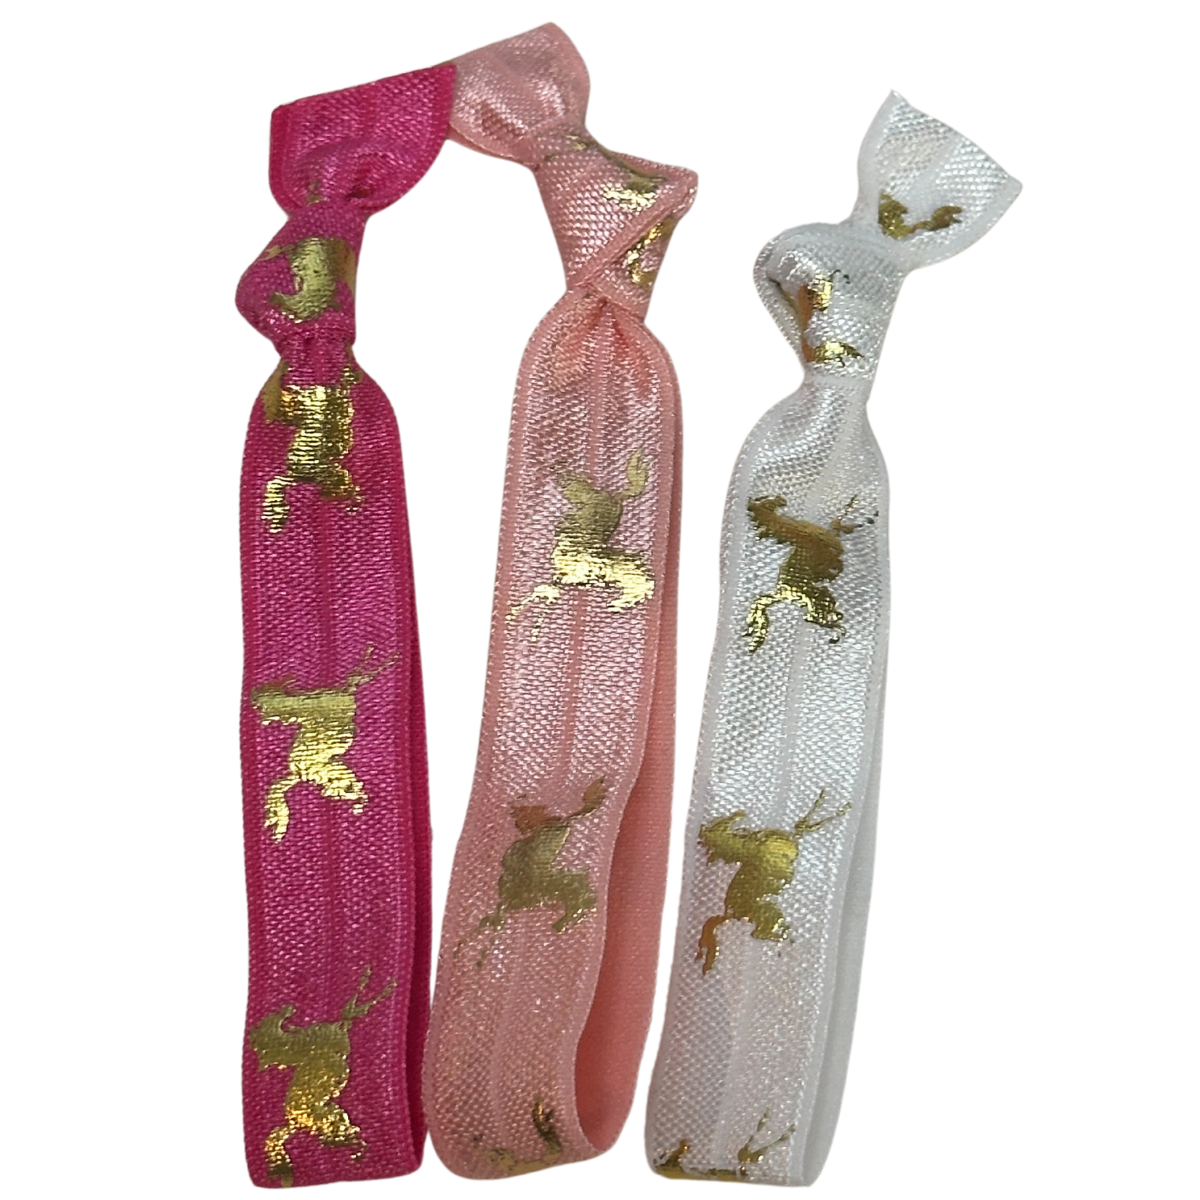 Gold Foil Horse Print Hair Ties in Pretty in Pink - 3pc.